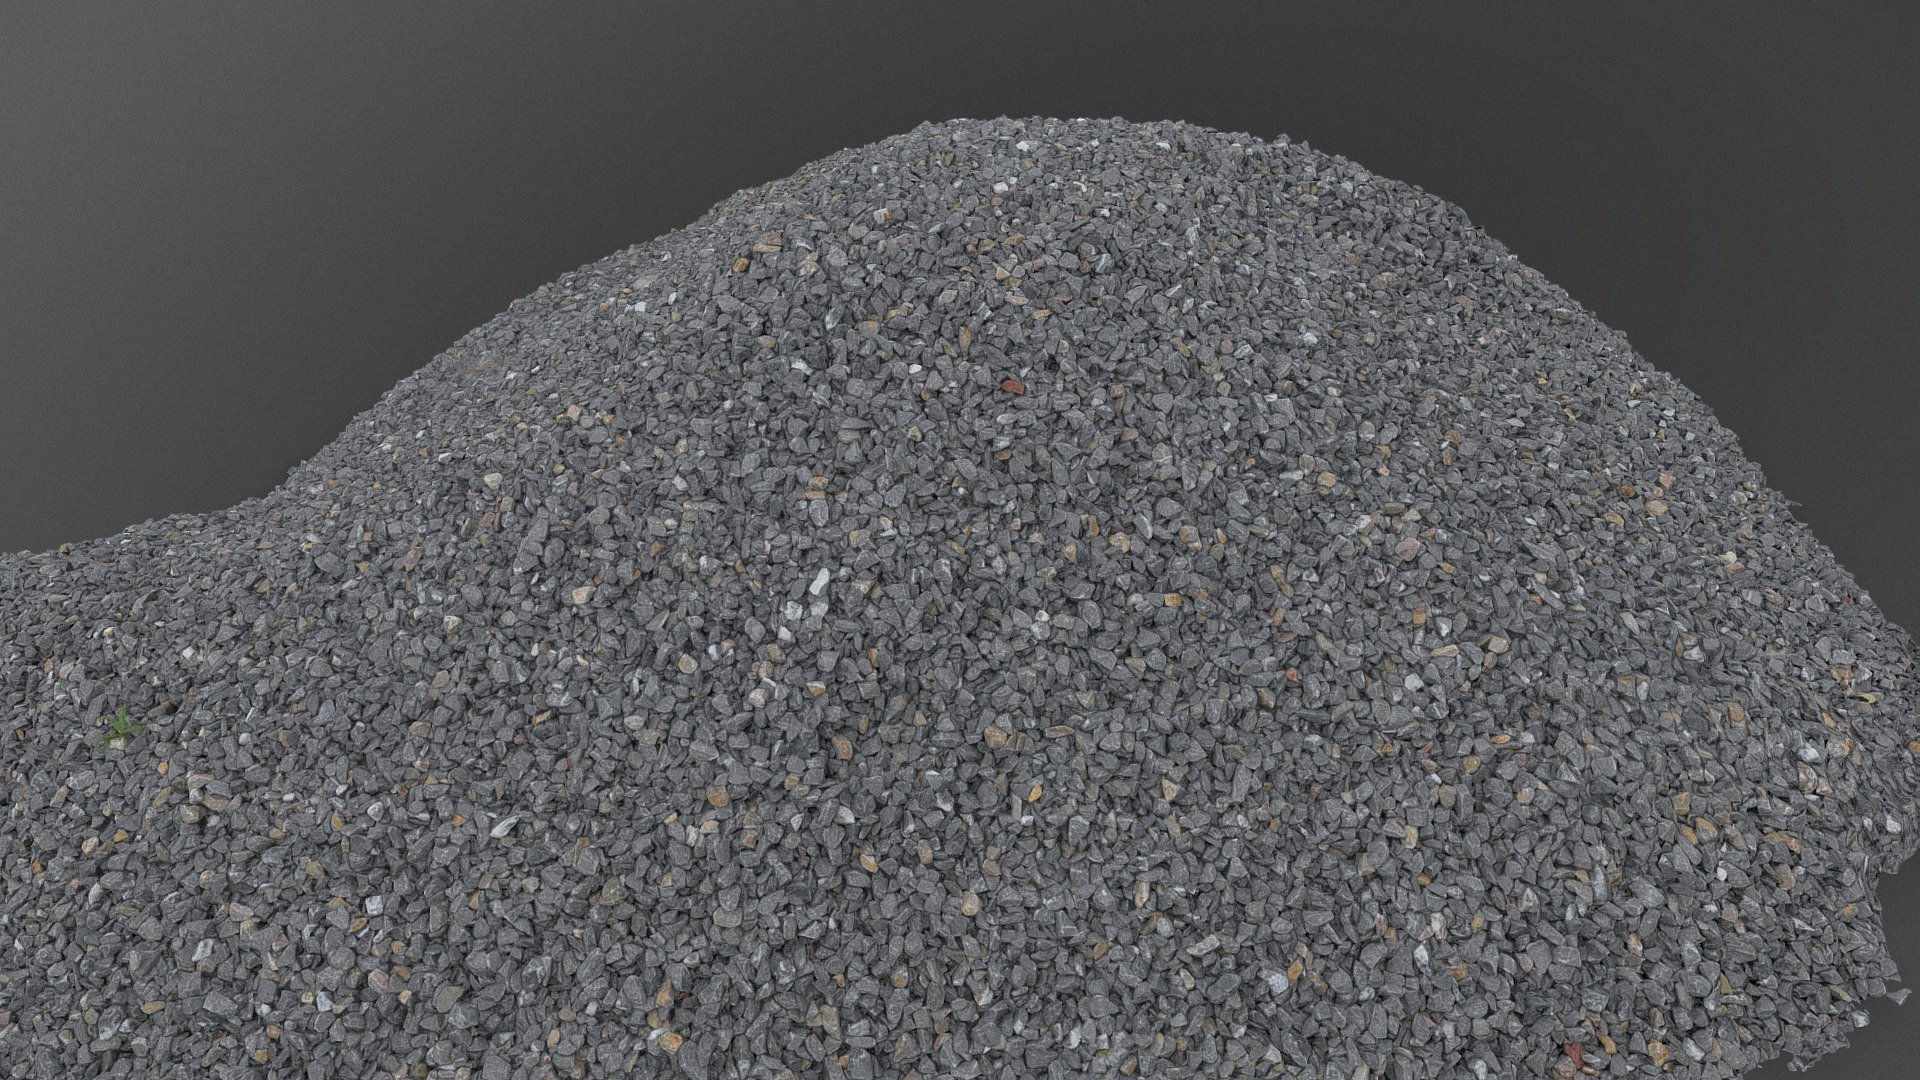 Large Gray Paving gravel heap pile mound of building pavement construction material small stones pebble of quartz

Photogrammetry scan 140x36MP, 4x8K texture + hd normals - Large gray paving gravel heap - Buy Royalty Free 3D model by matousekfoto 3d model